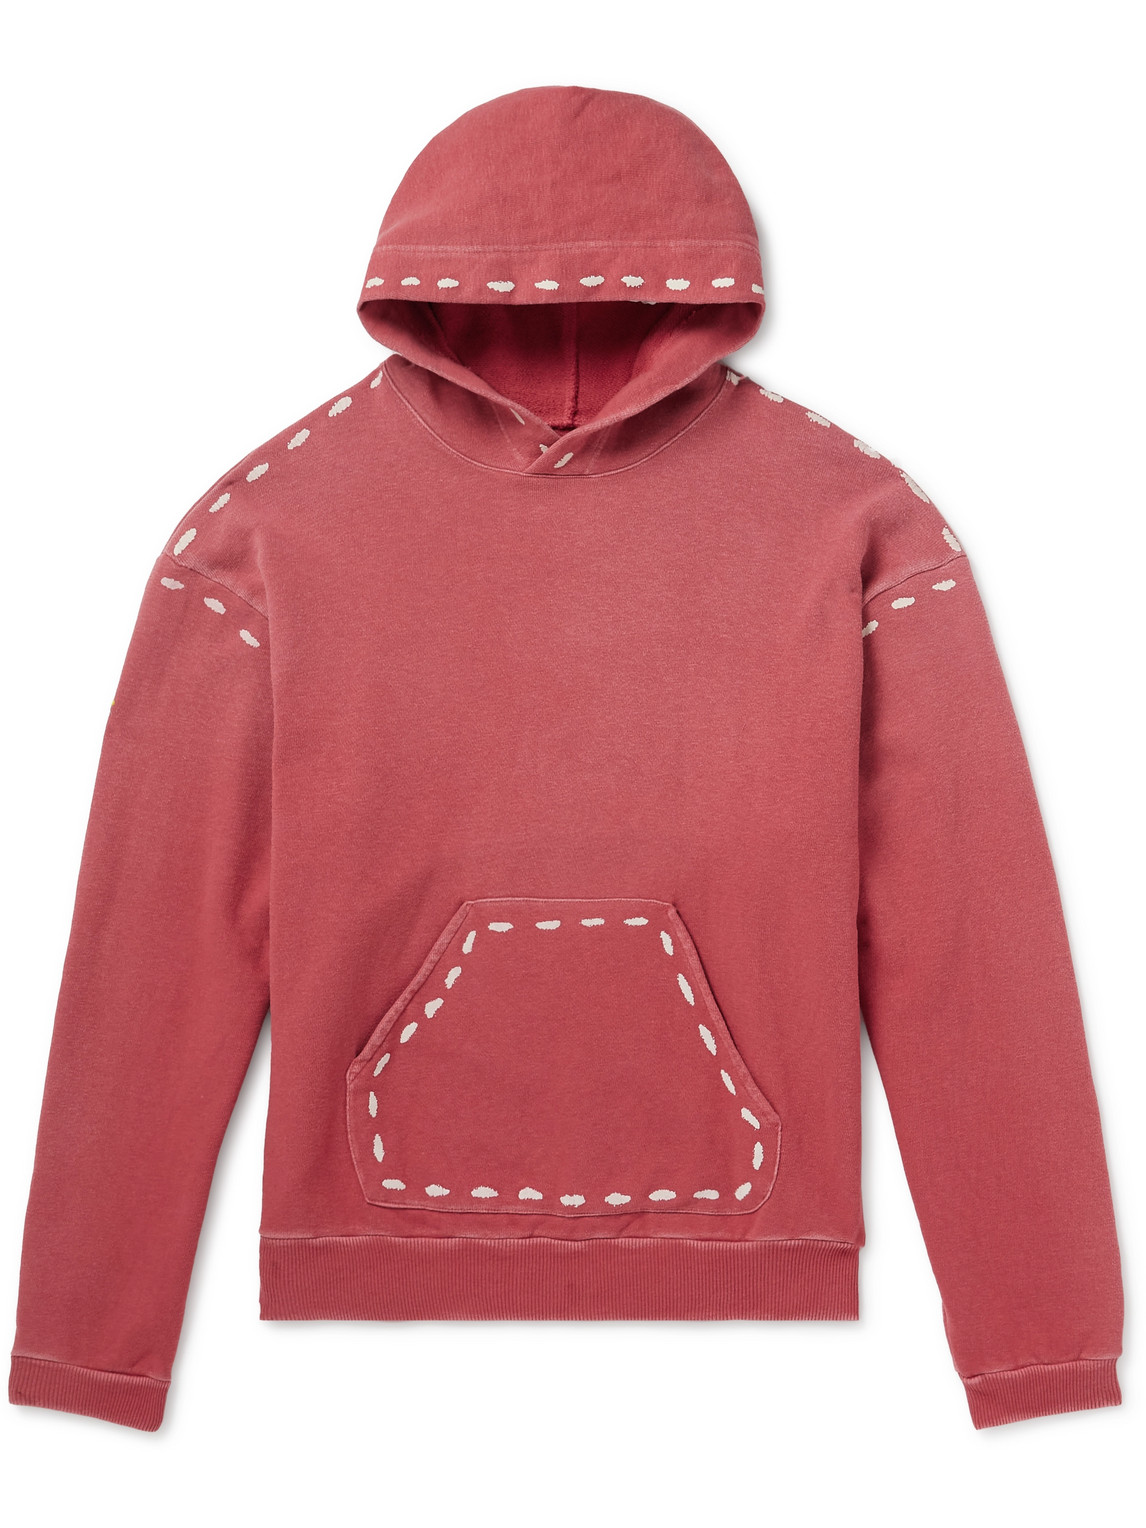 Kapital Marionette Printed Cotton-jersey Hoodie In Red